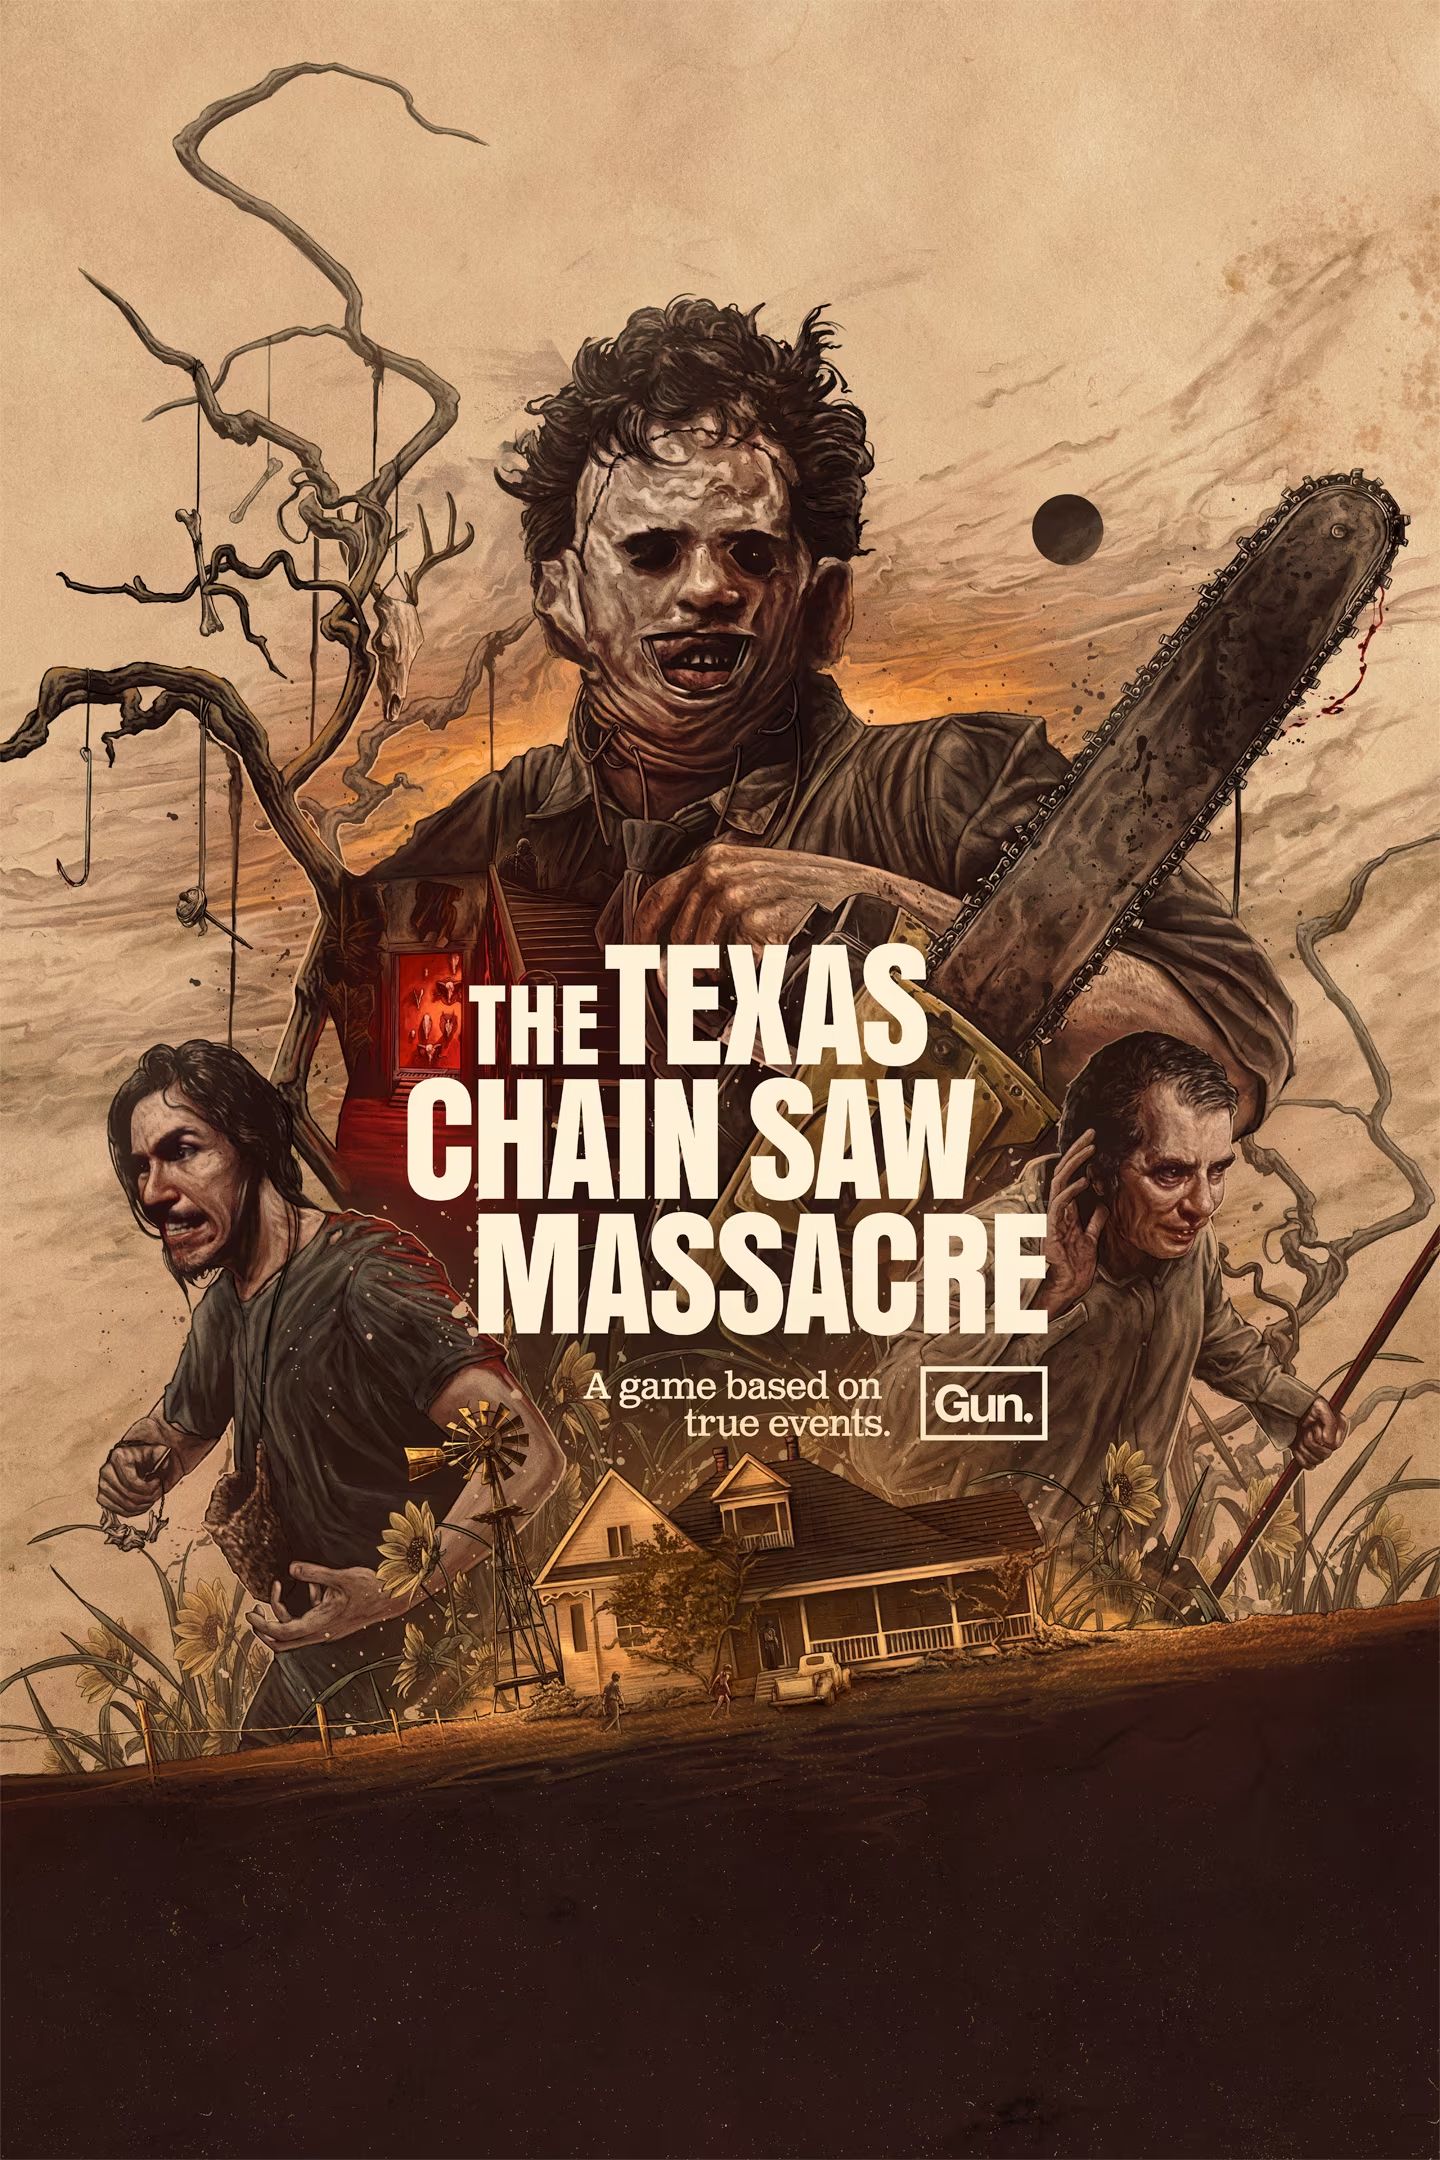 minimum dating age rule in texas chainsaw massacre game